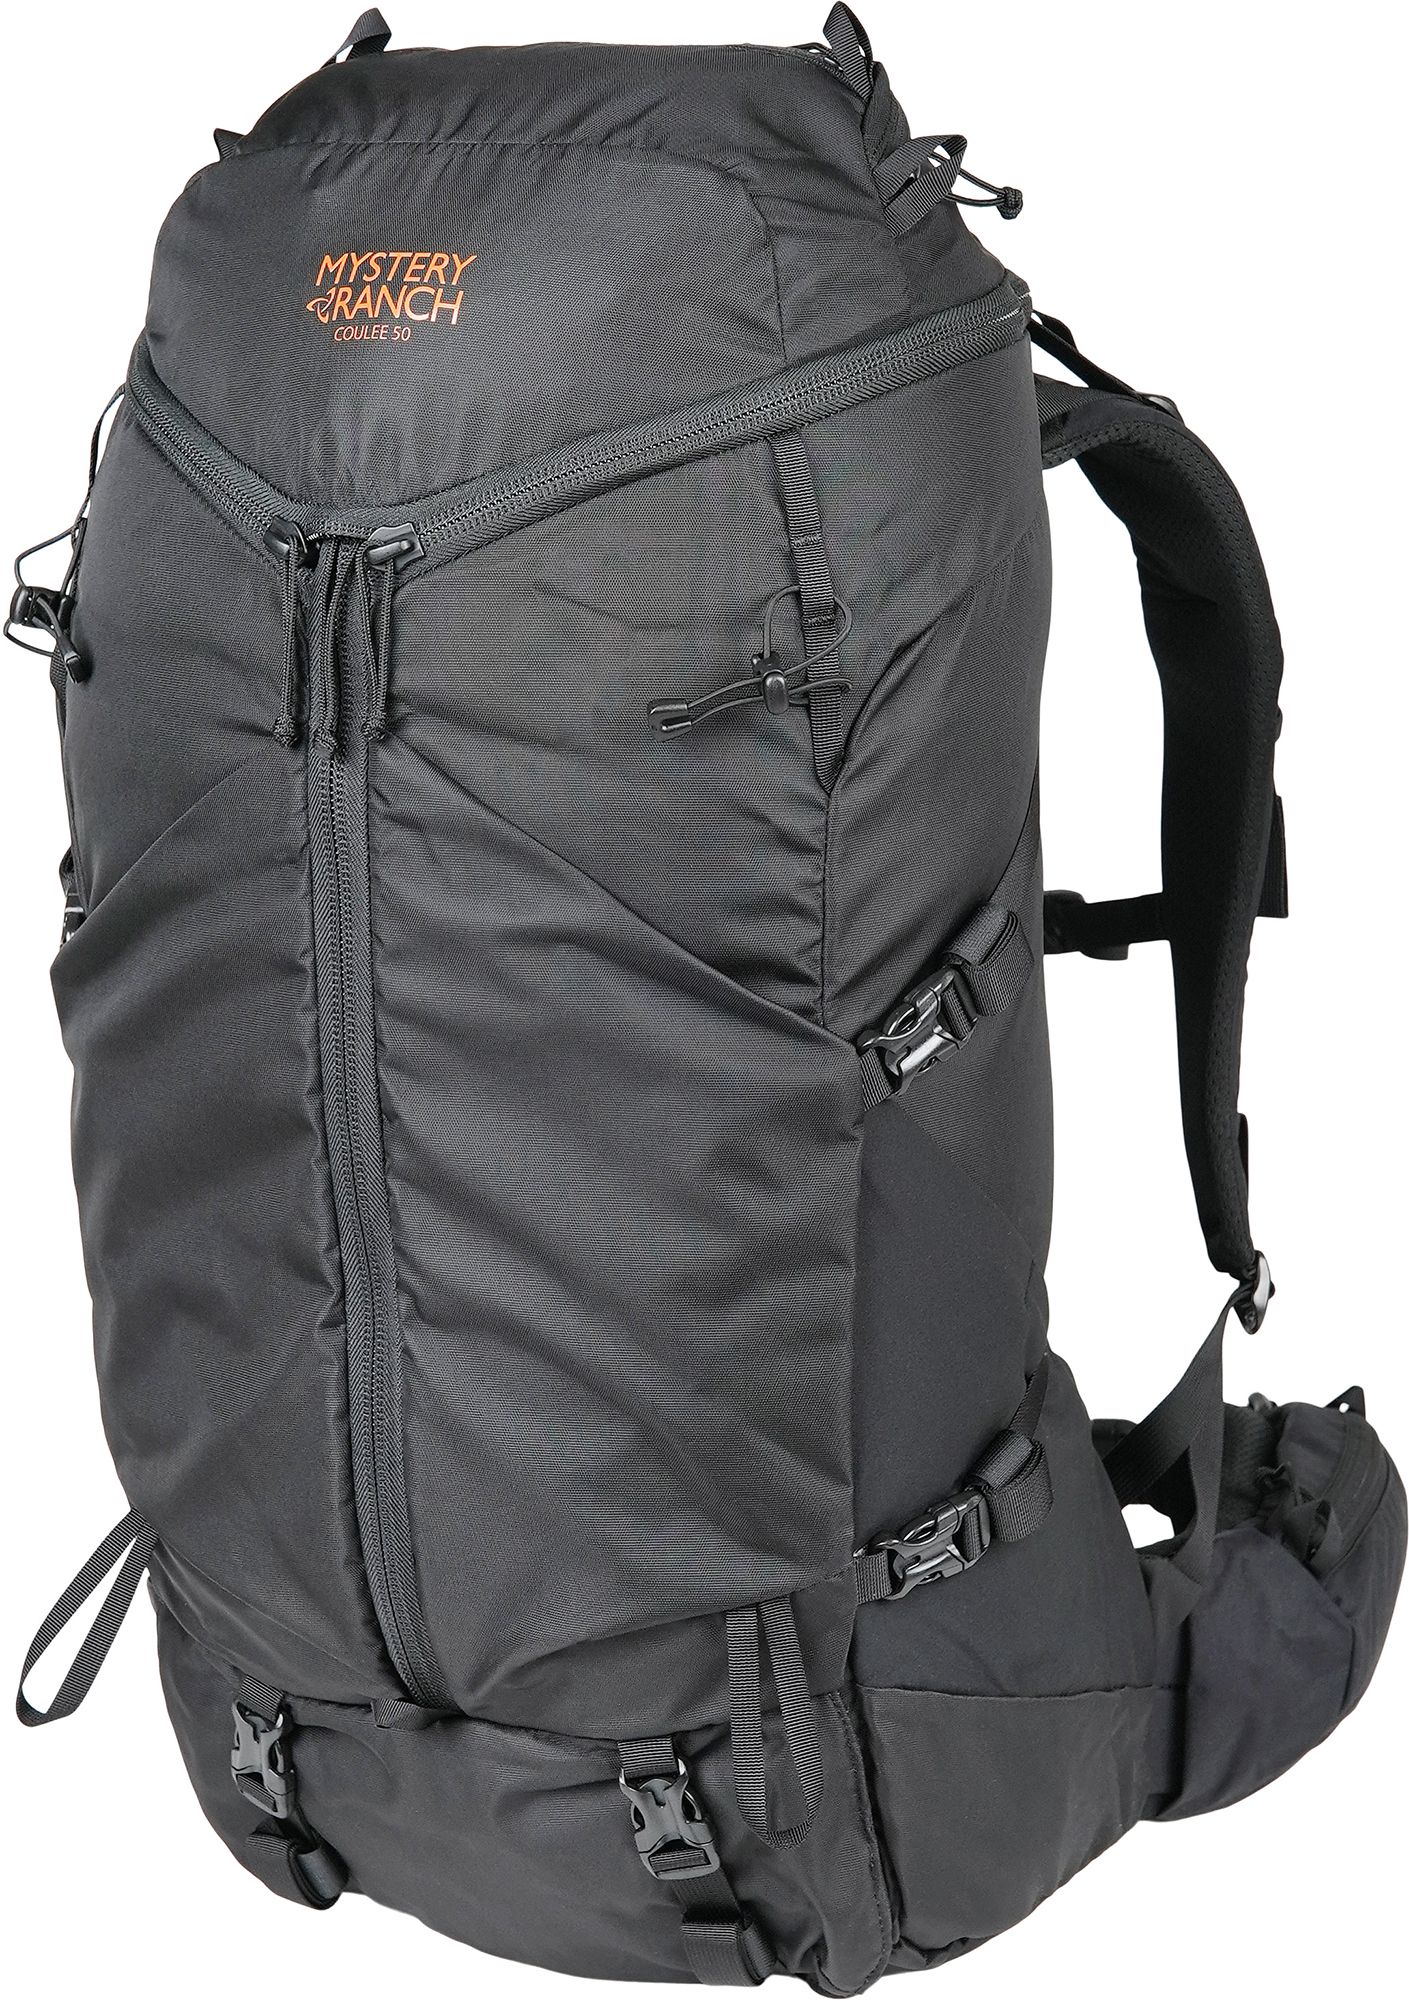 Photos - Knife / Multitool Mystery Ranch Men's Coulee 50L Pack, Medium, Black | Father's Day Gift Ide 